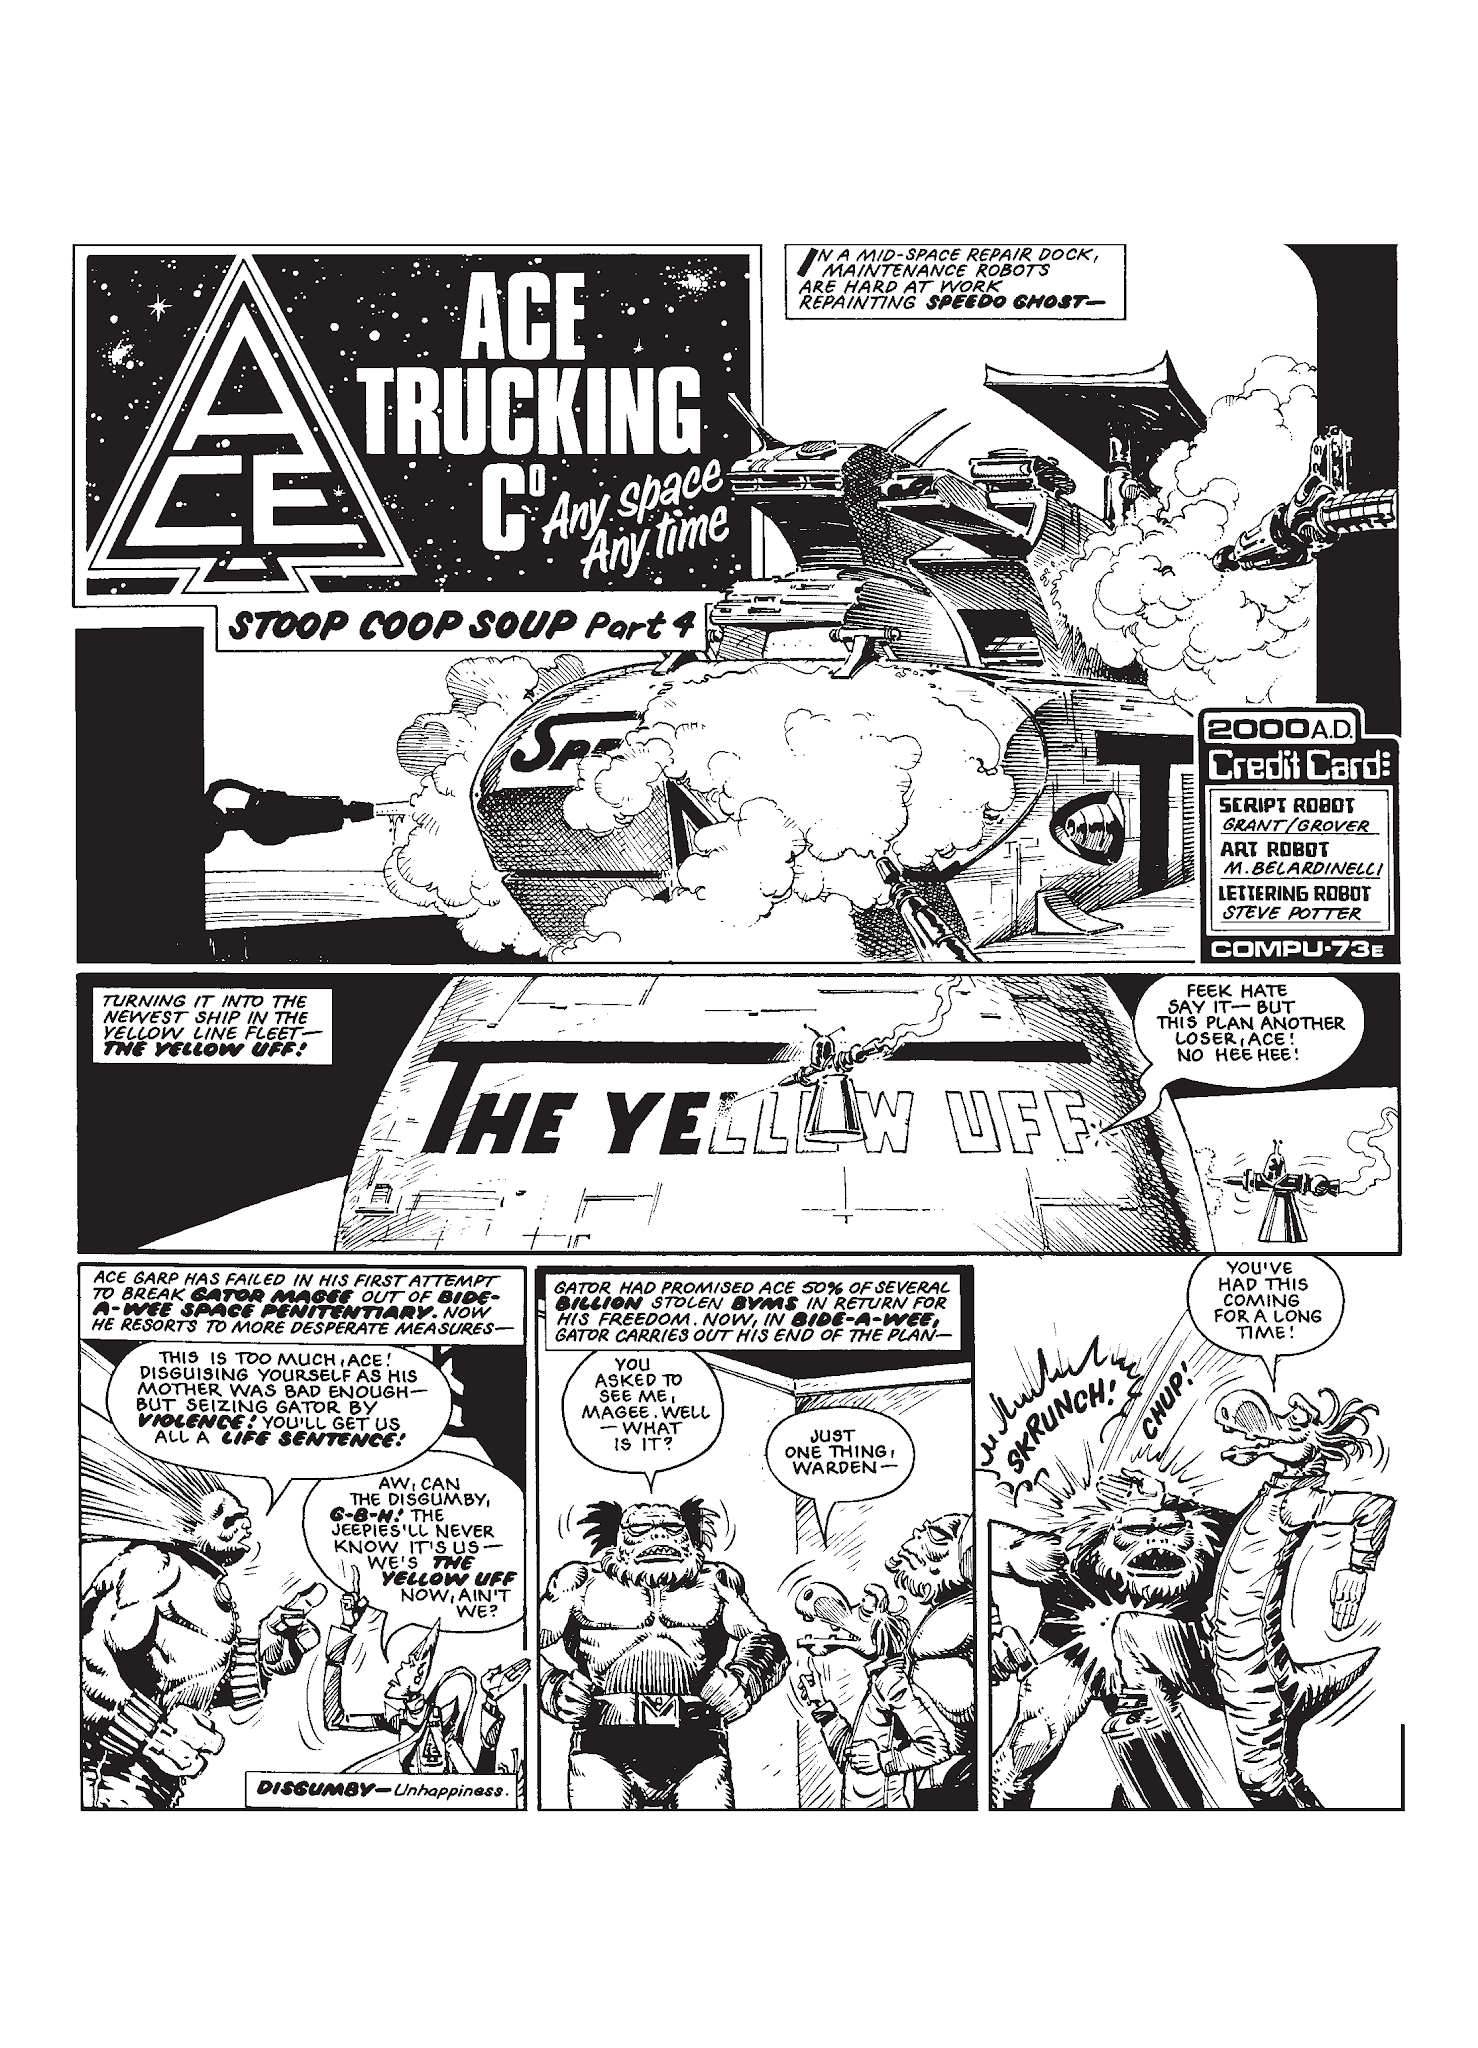 Read online The Complete Ace Trucking Co. comic -  Issue # TPB 1 - 280